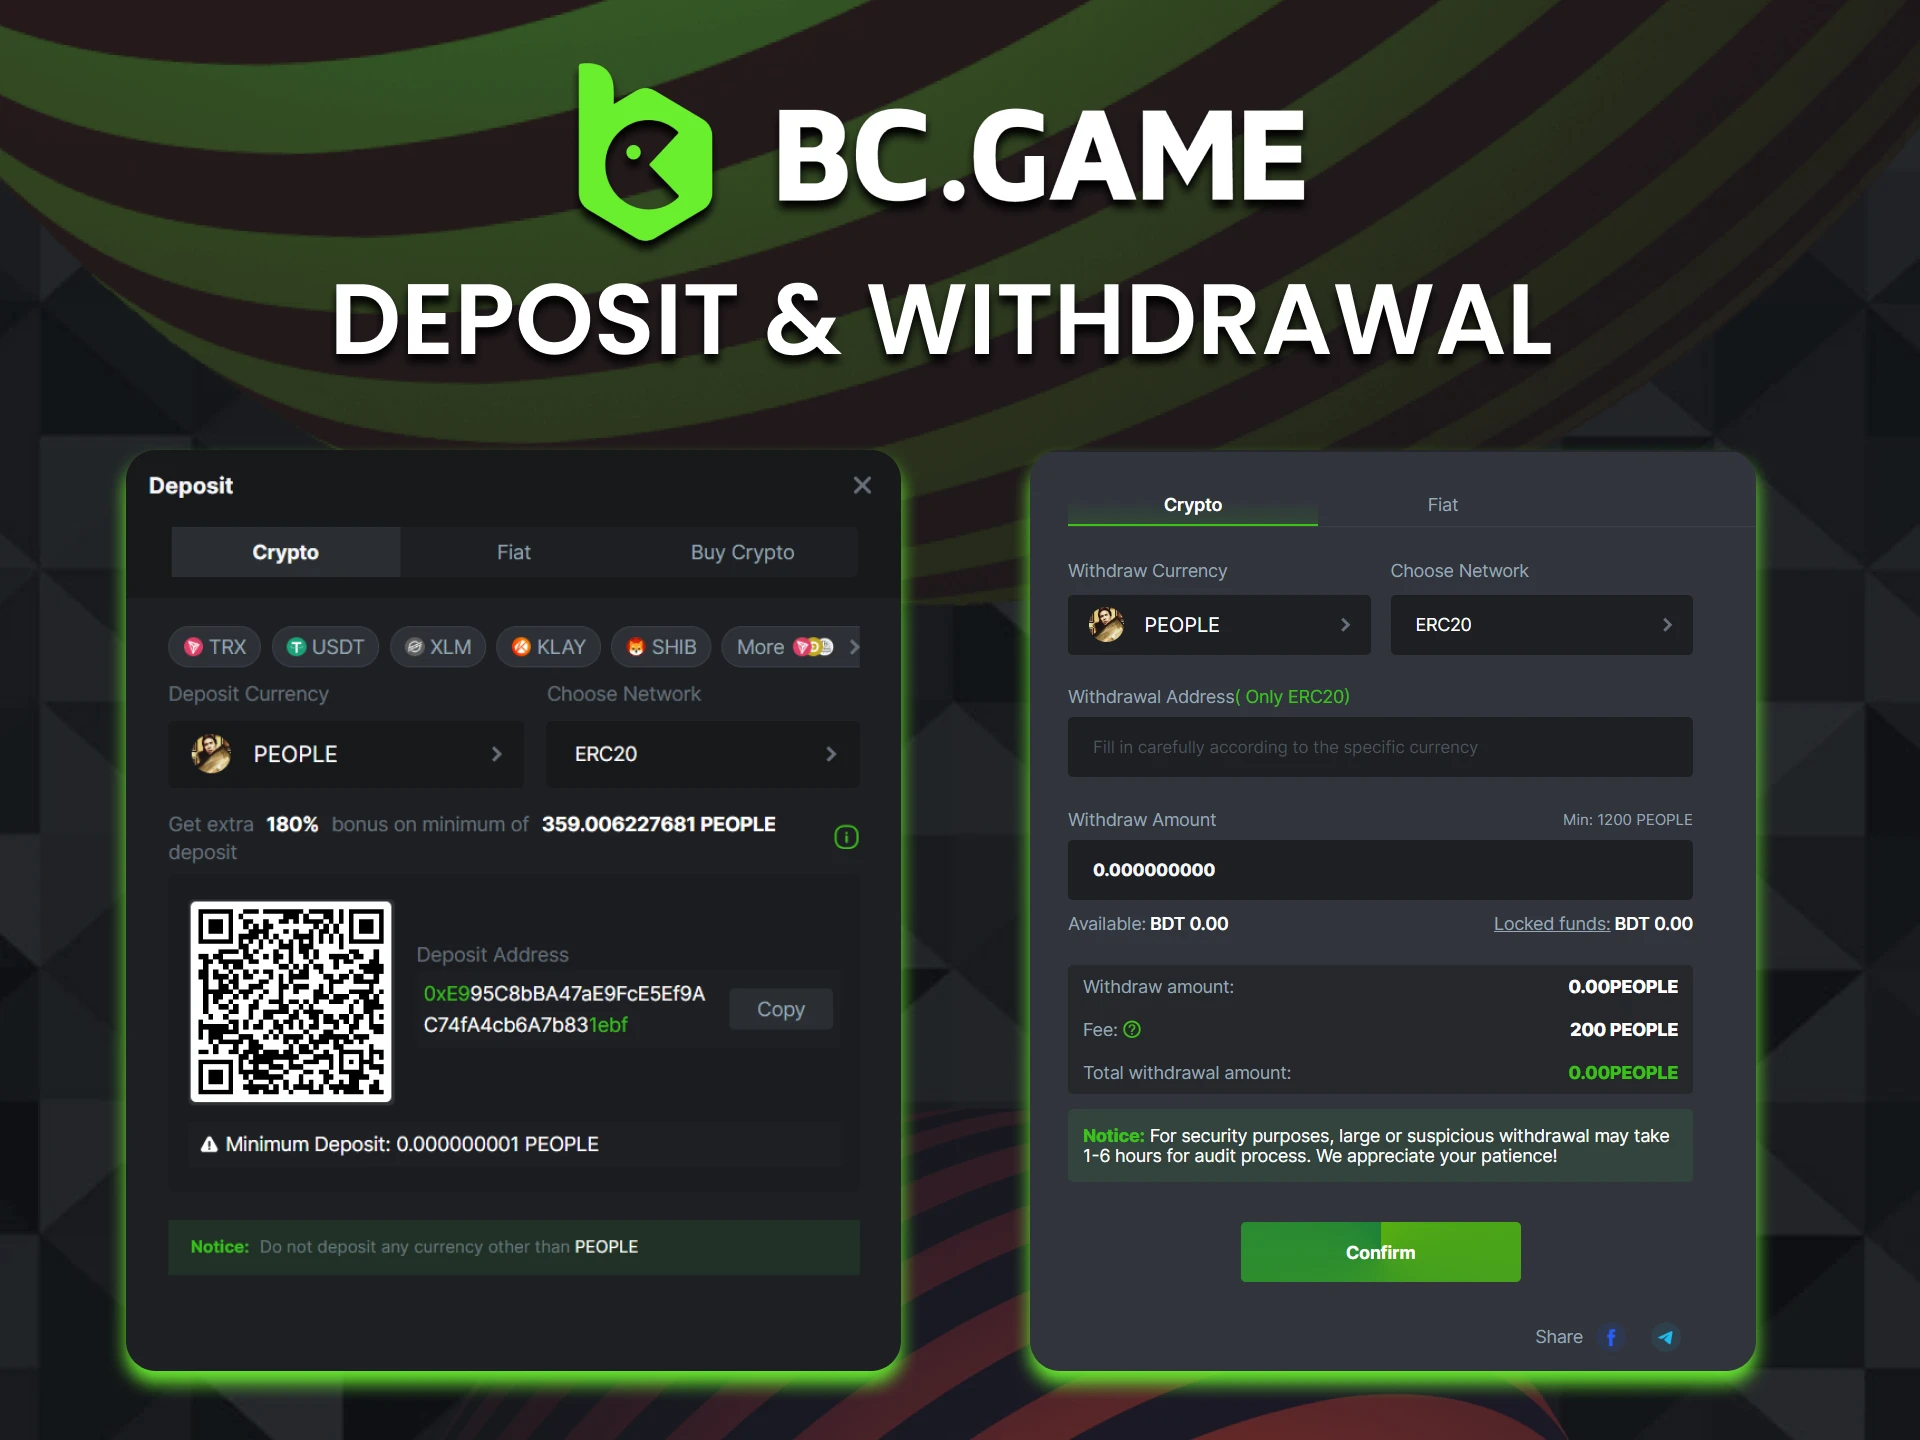 We will talk about transactions on BC Game.